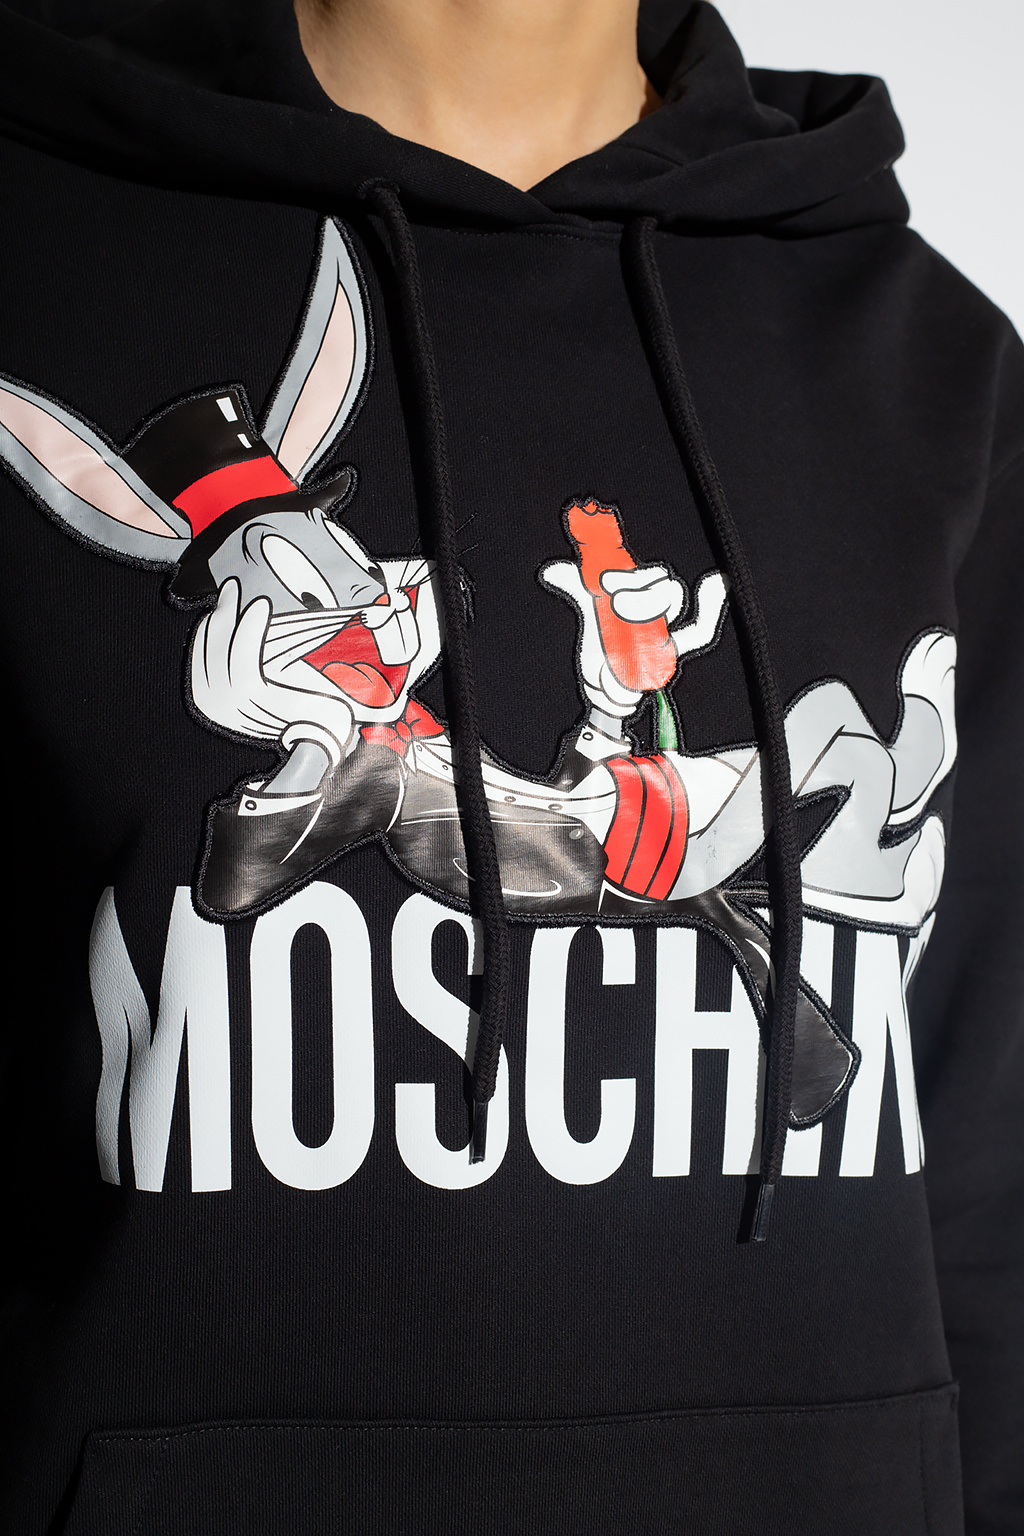 Moschino wide-sleeve cotton-blend hoodie